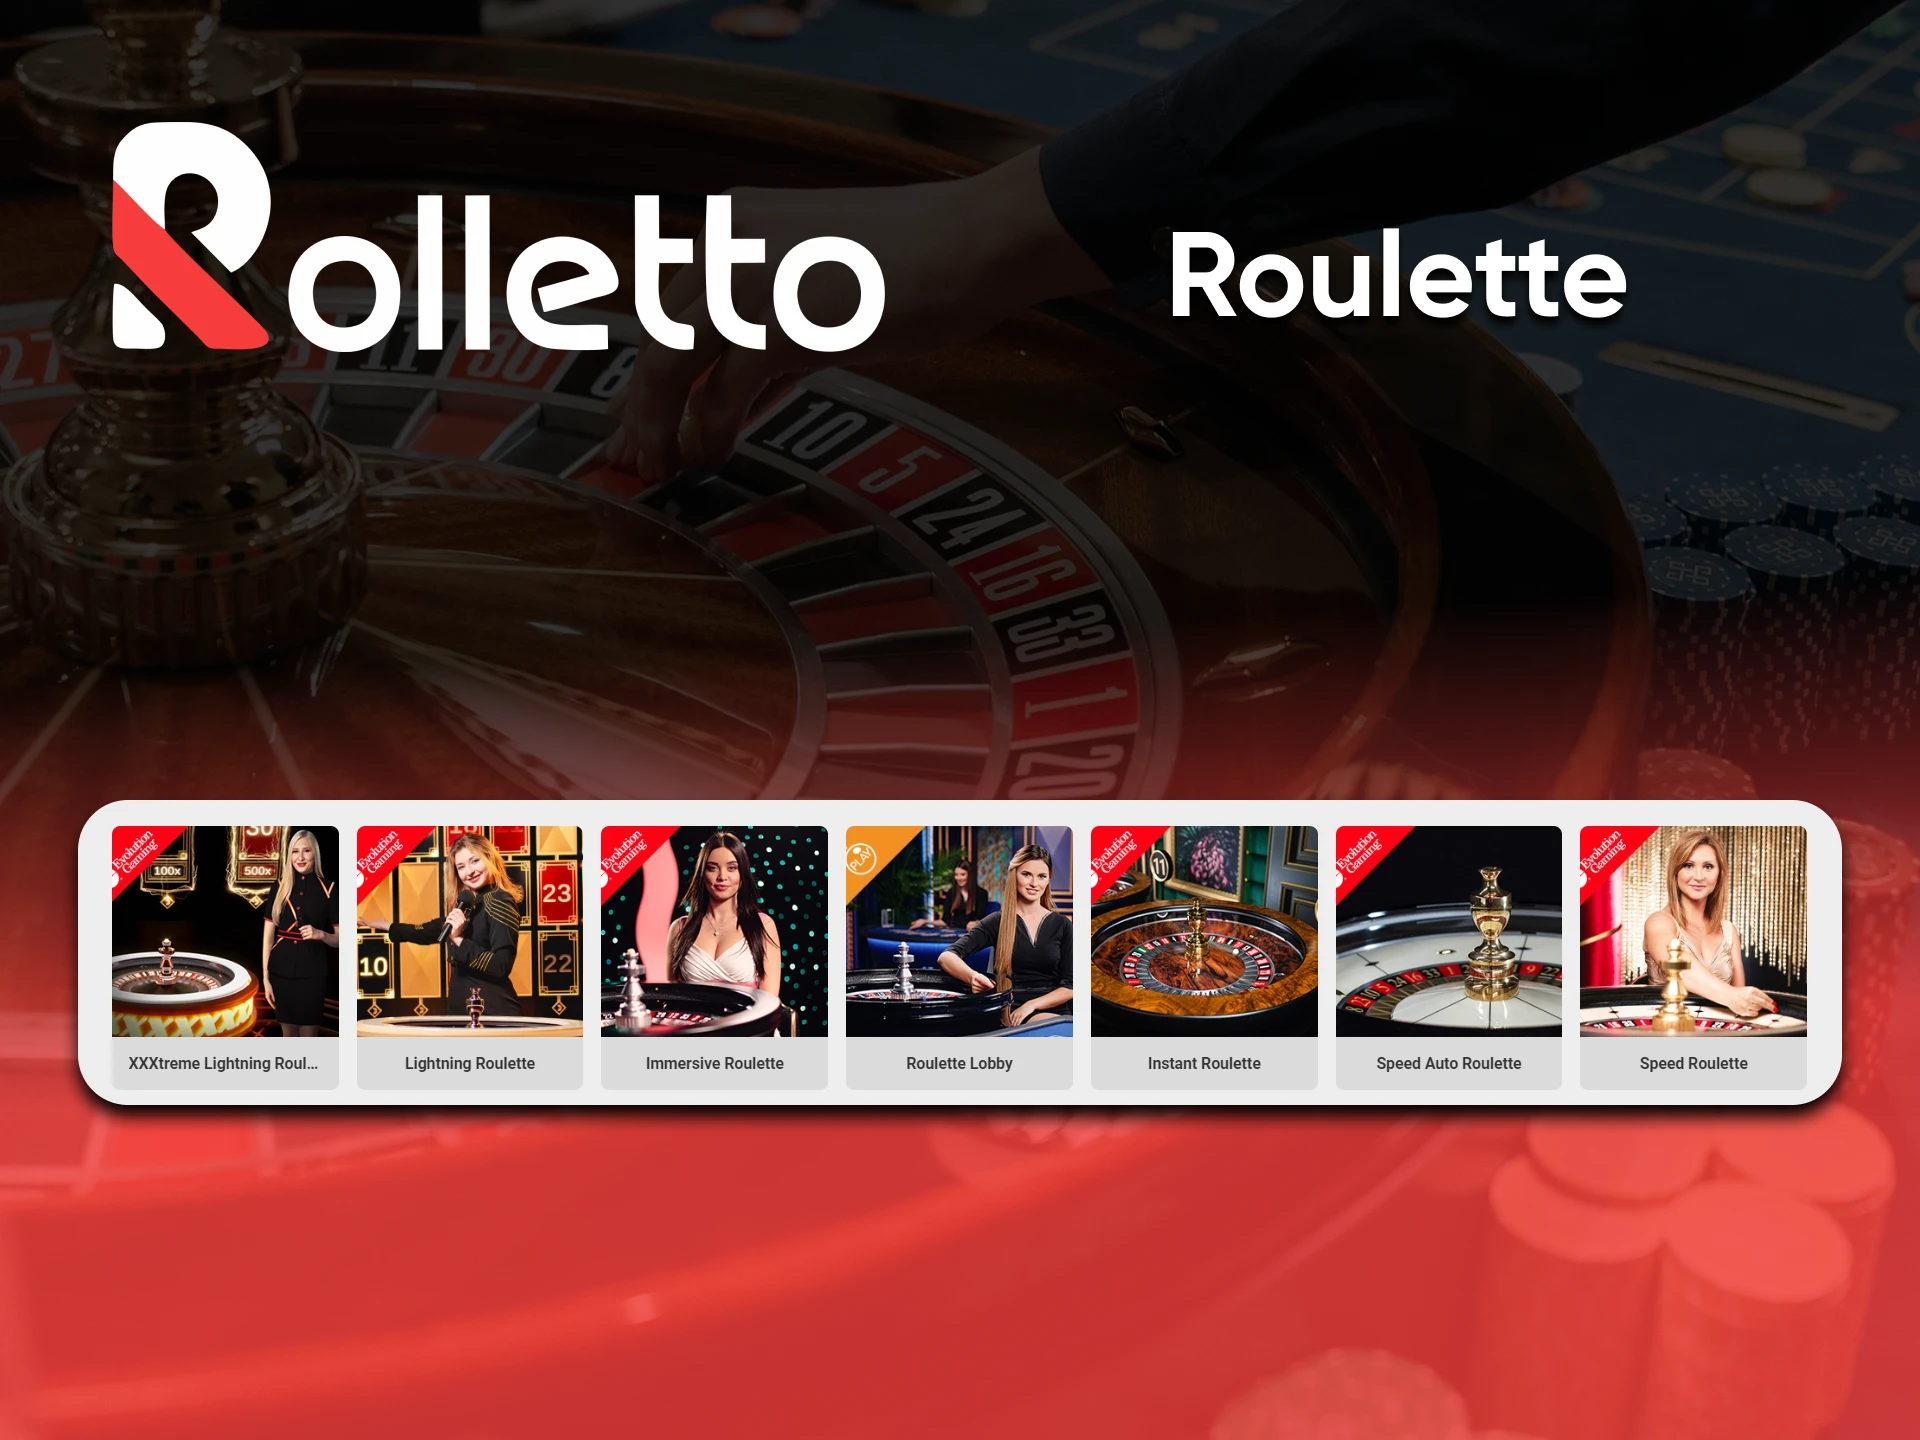 To play Roulette, go to the special section of the Rolletto website.